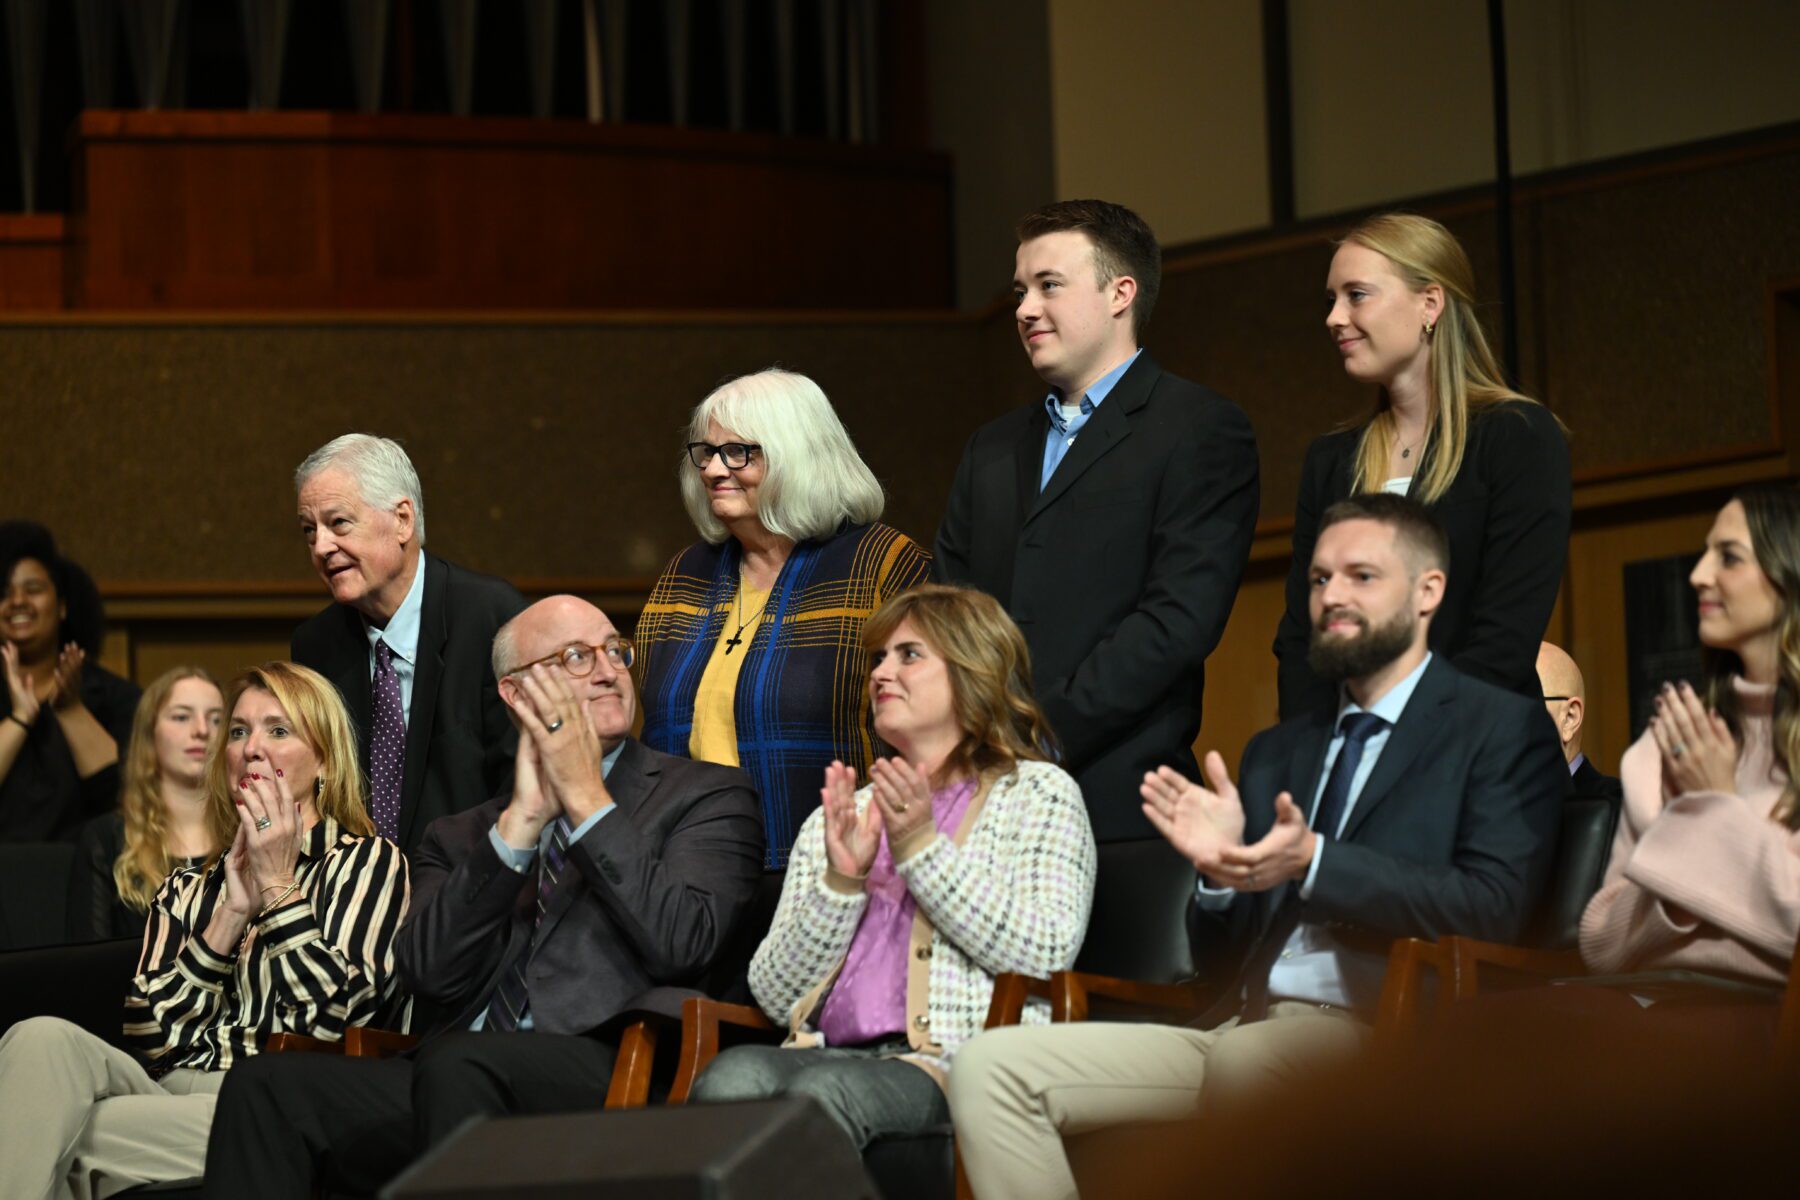 Students and Alumni are recognized during chapel service.